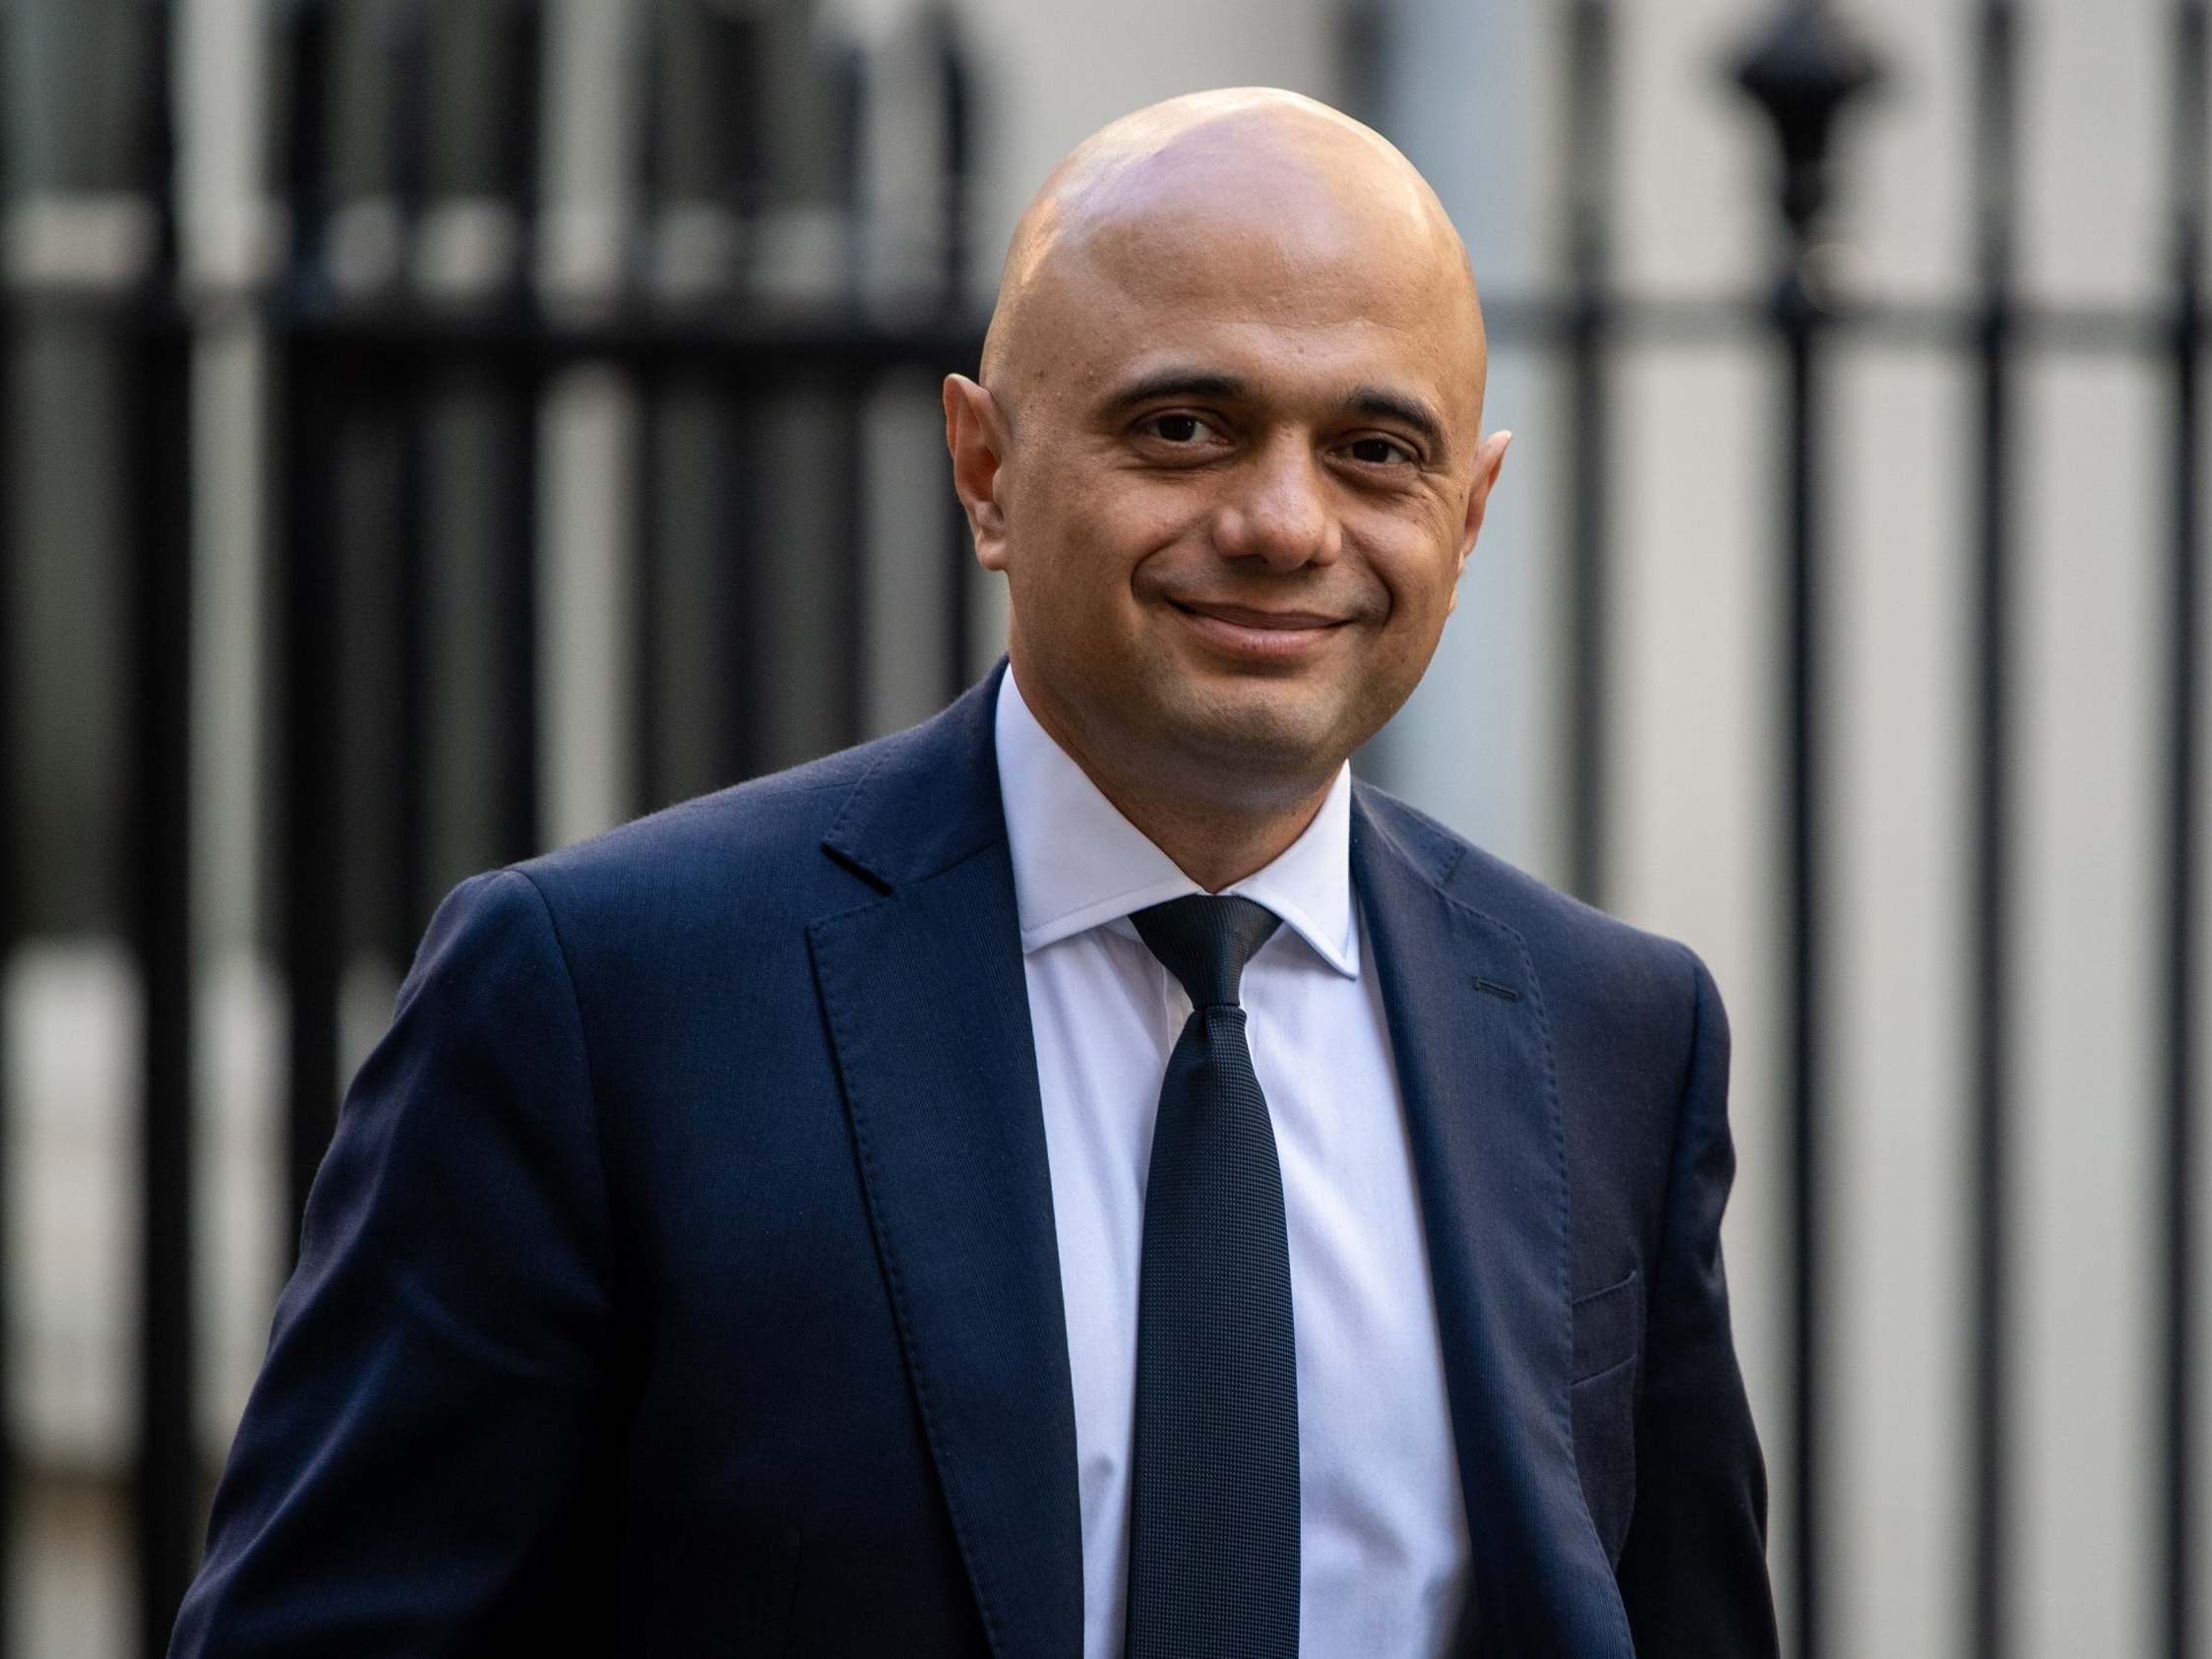 Mr Javid has said there will be no ‘blank cheque’ for departments